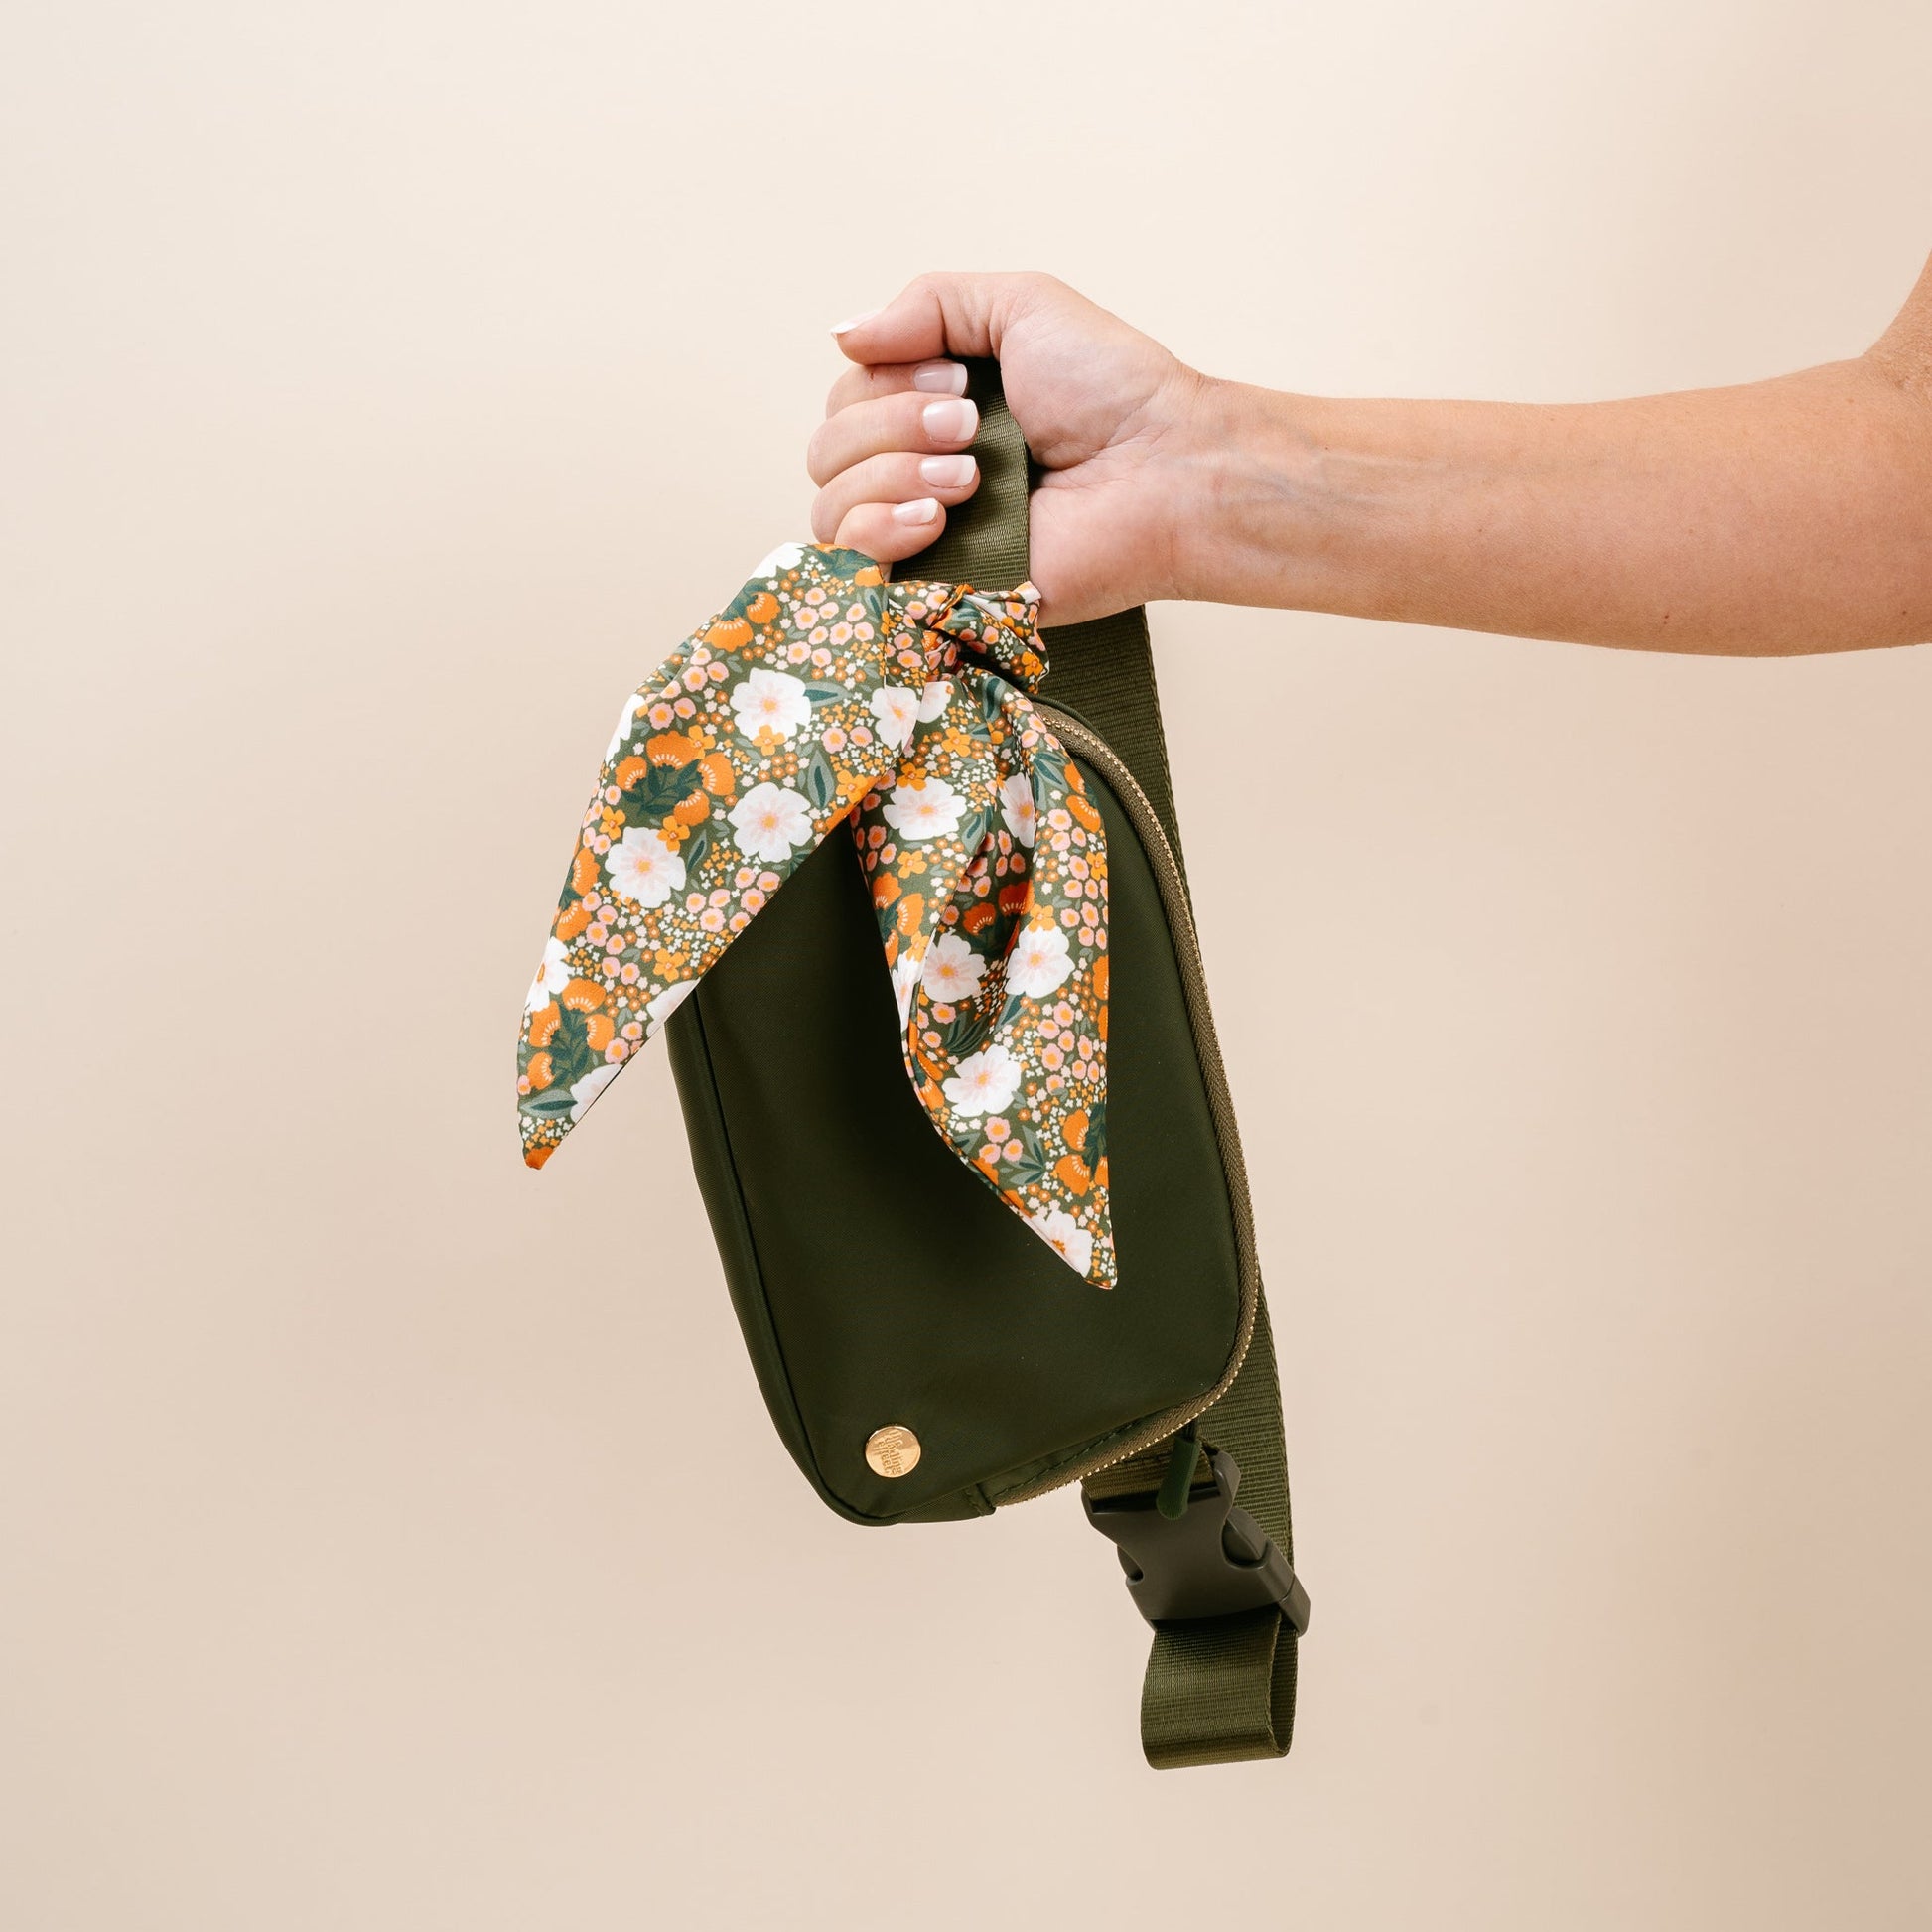 hand holding olive green all your need bag by the strap.